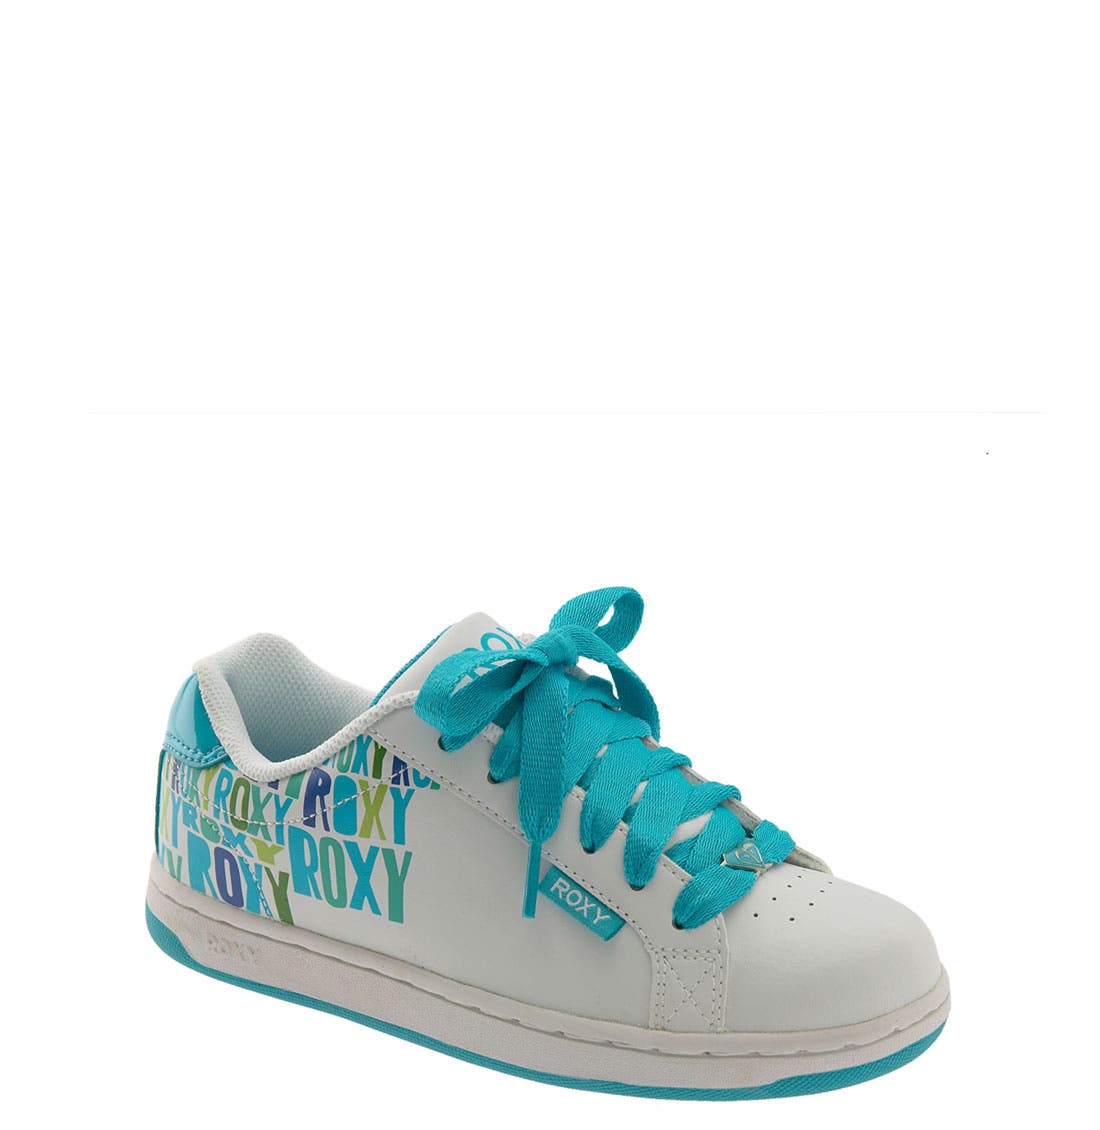 roxy shoes for kids